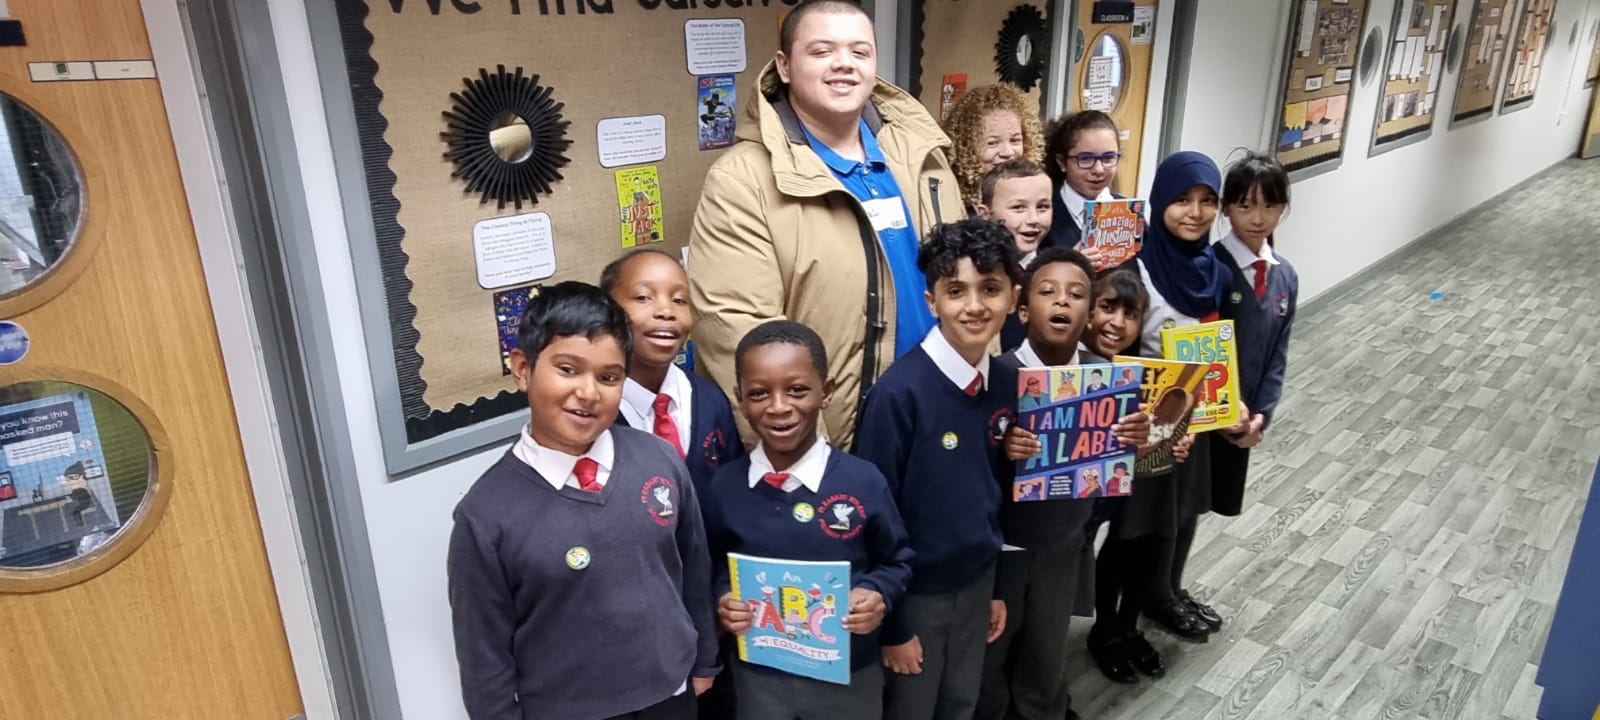 Wade Holligan poses with students from Pleasant Street Primary School. They hold up books from the collection in front of them.